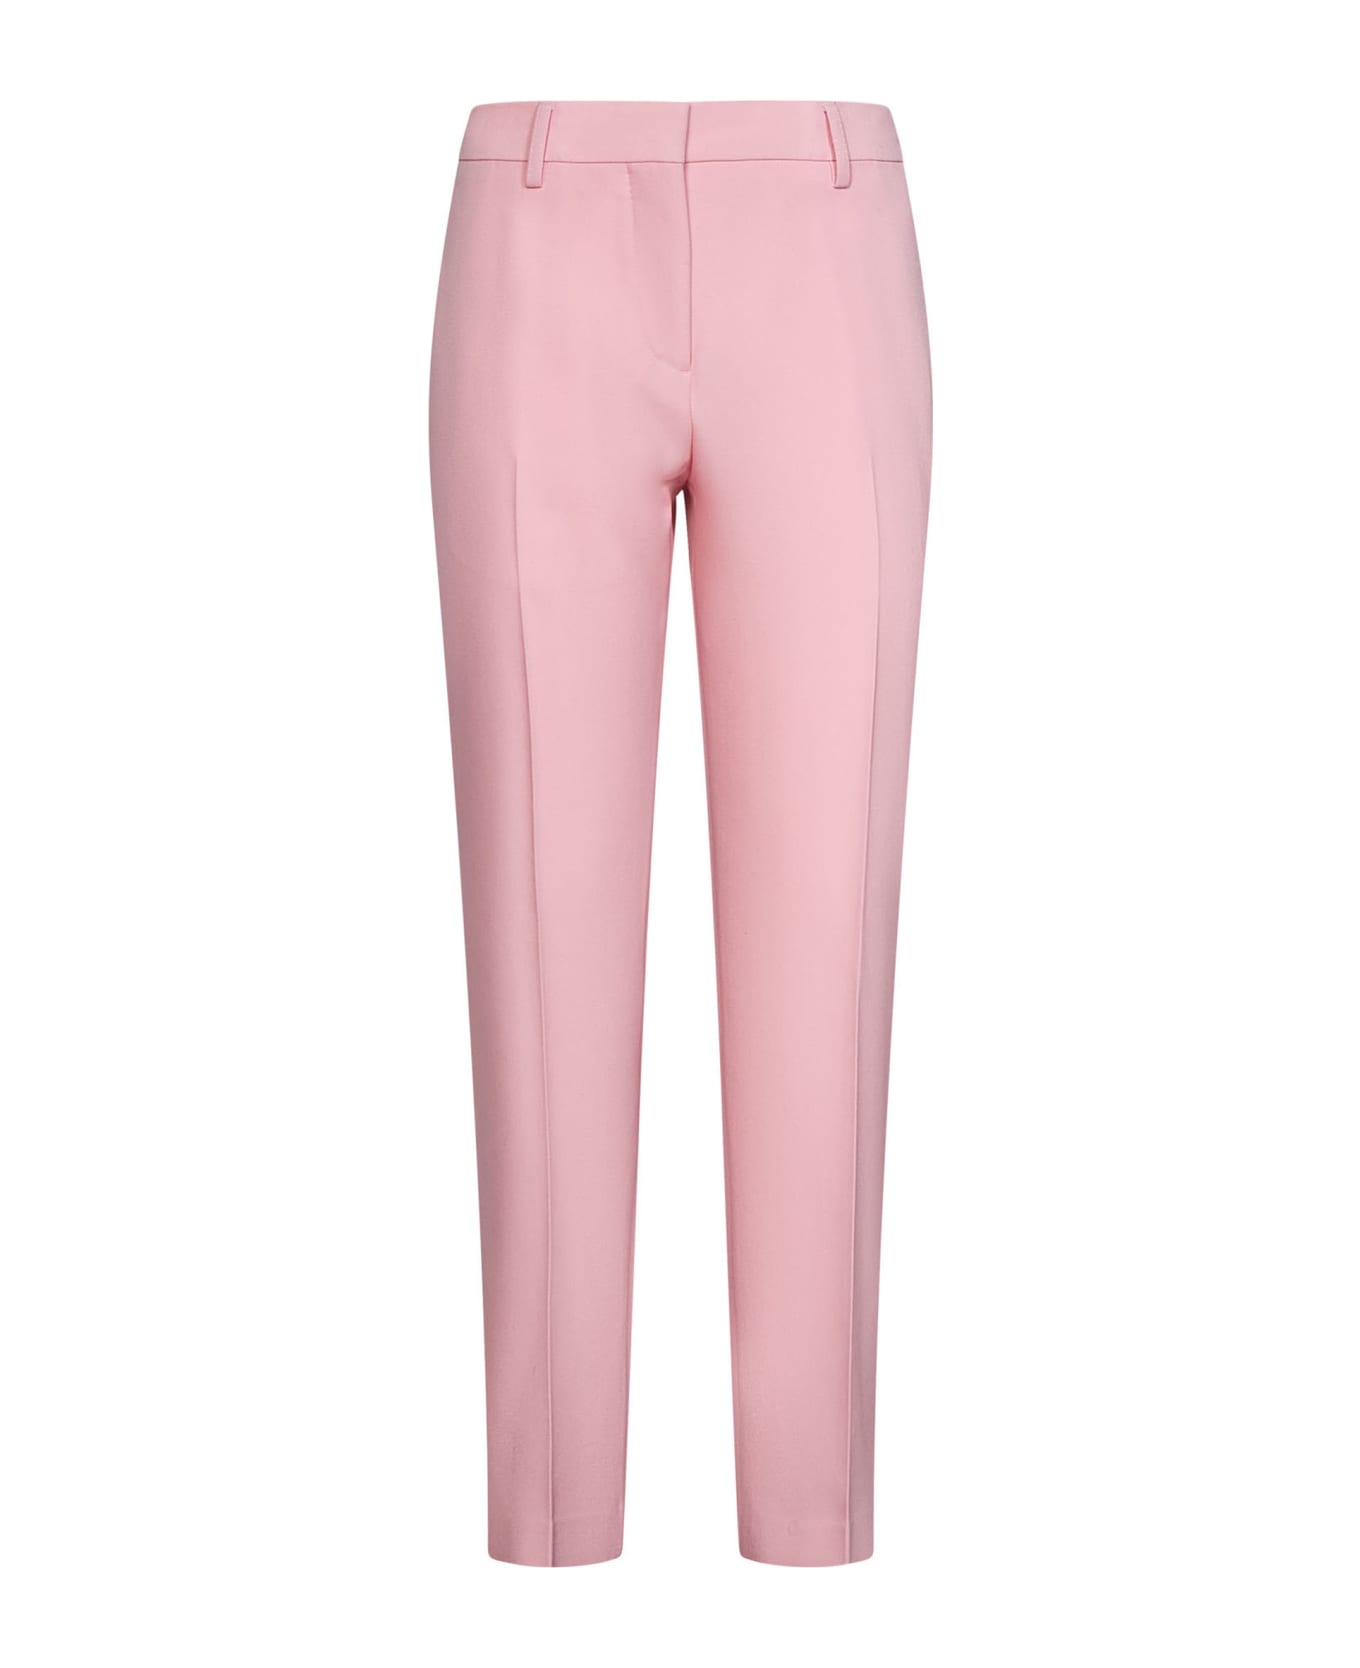 Burberry Aimie Pant - Pink ボトムス